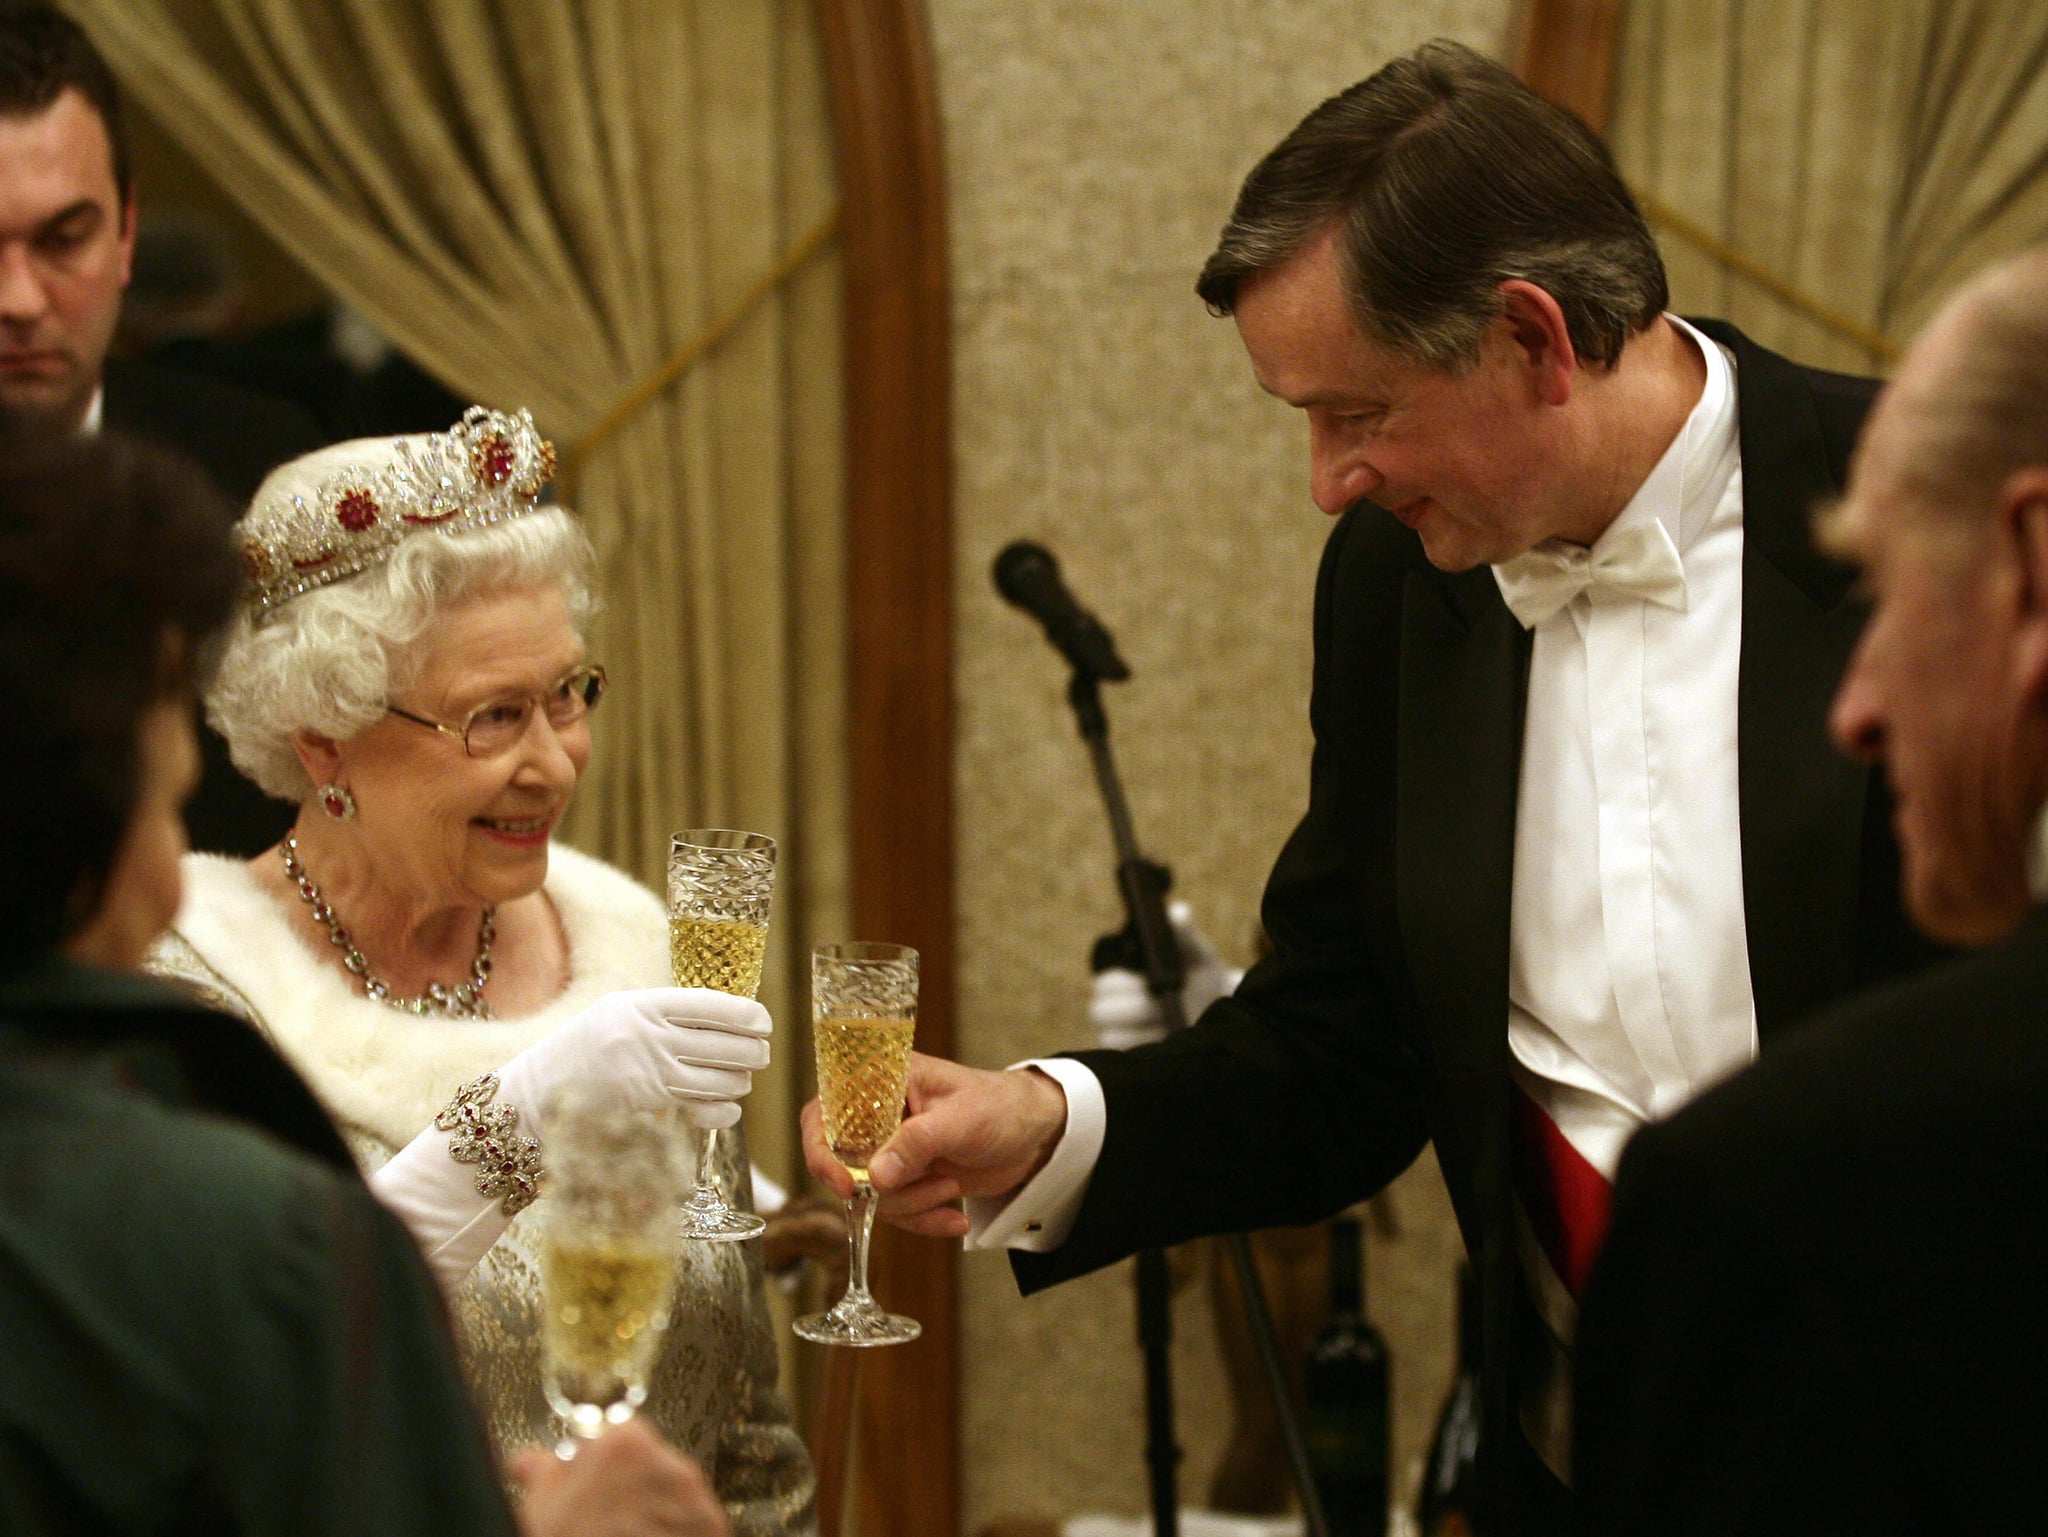 Britain's Queen Elizabeth (L) shares a glass of wine with Slovenia's President Danilo Turk (R) during a dinner at Brdo Castle on October 21, 2008. Queen Elizabeth and Prince Philip are on a two-day official visit to Slovenia. AFP PHOTO Srdjan Zivulovic/pool (Photo credit should read SRDJAN ZIVULOVIC/AFP/Getty Images)